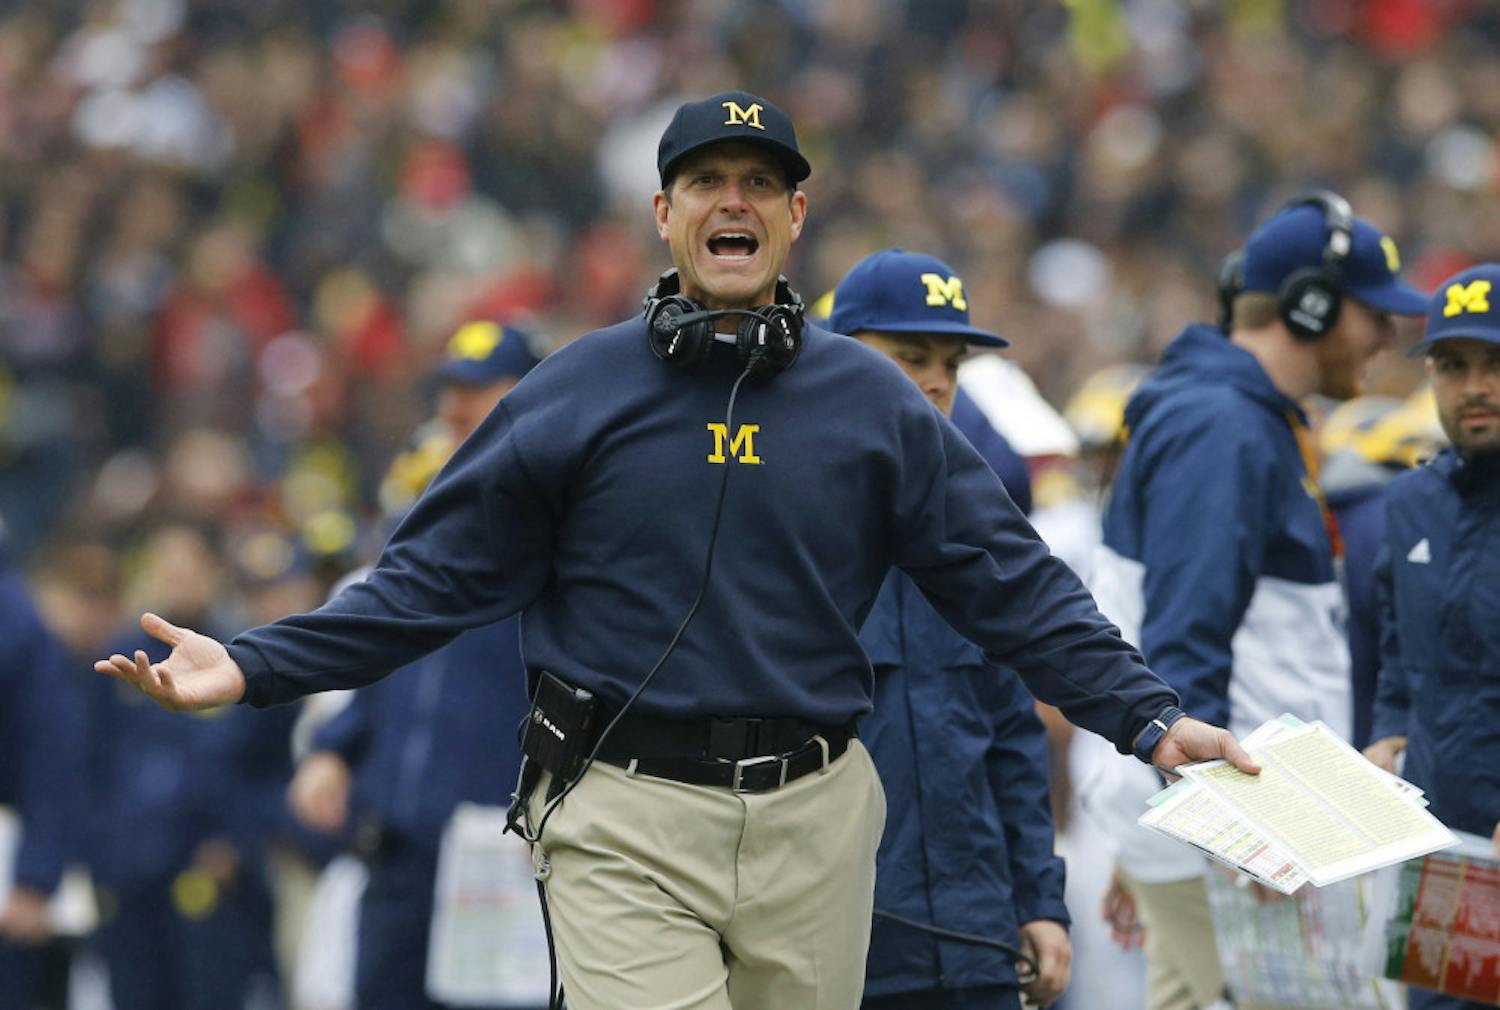 Michigan football coach Jim Harbaugh refuses to release his roster for the 2017 season. That level of paranoia makes him a perfect fit for the U.S. military.